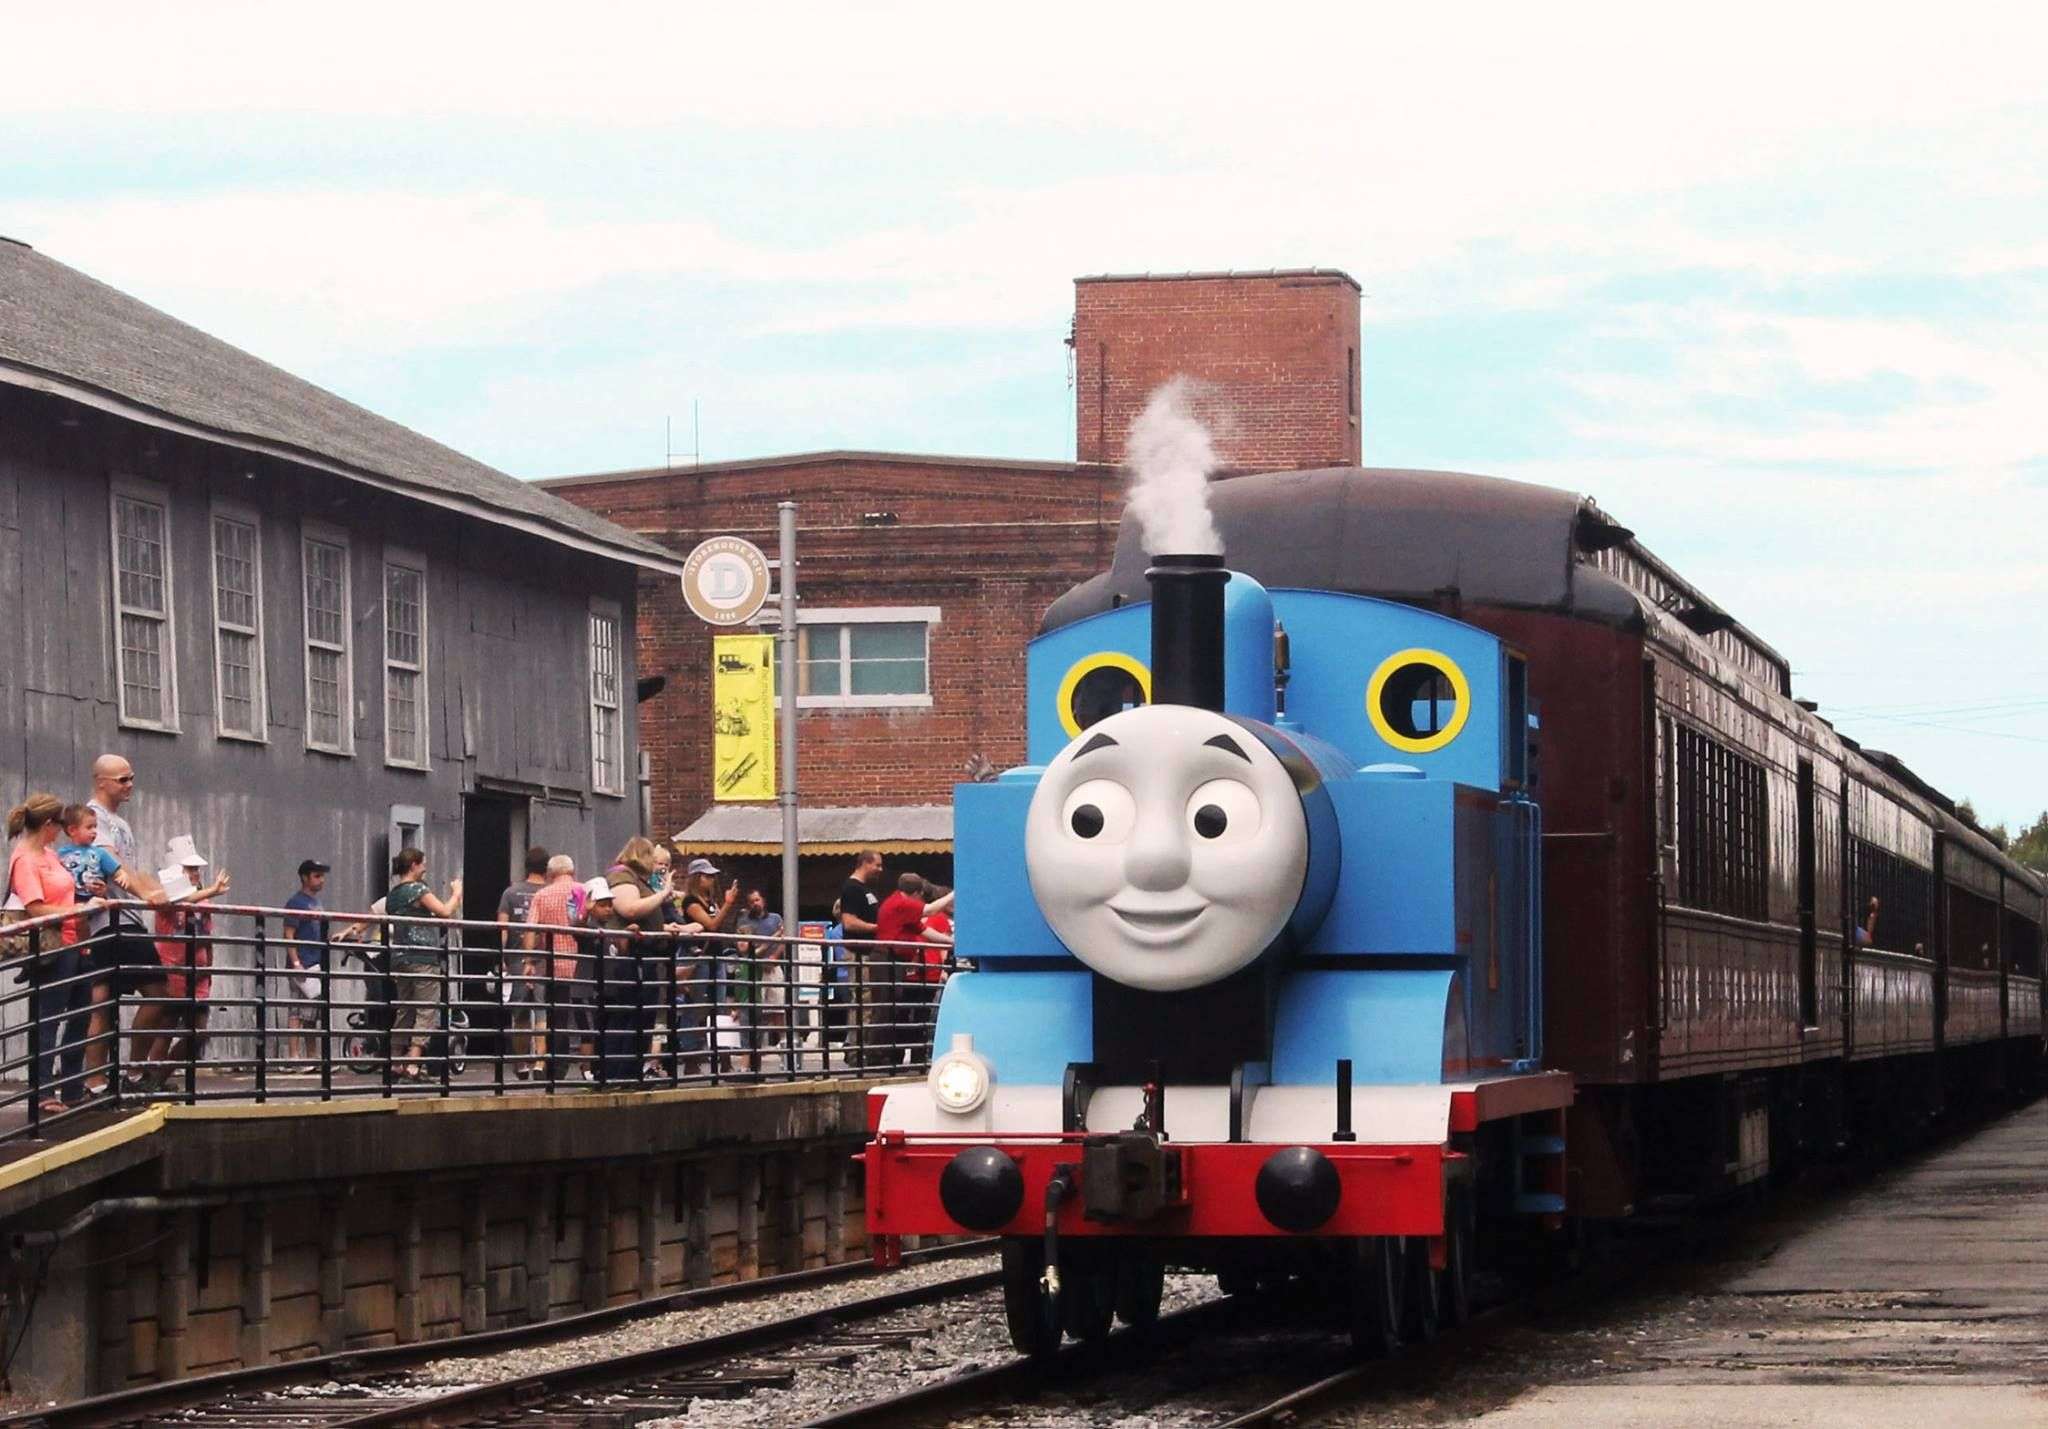 We love it when Thomas visits